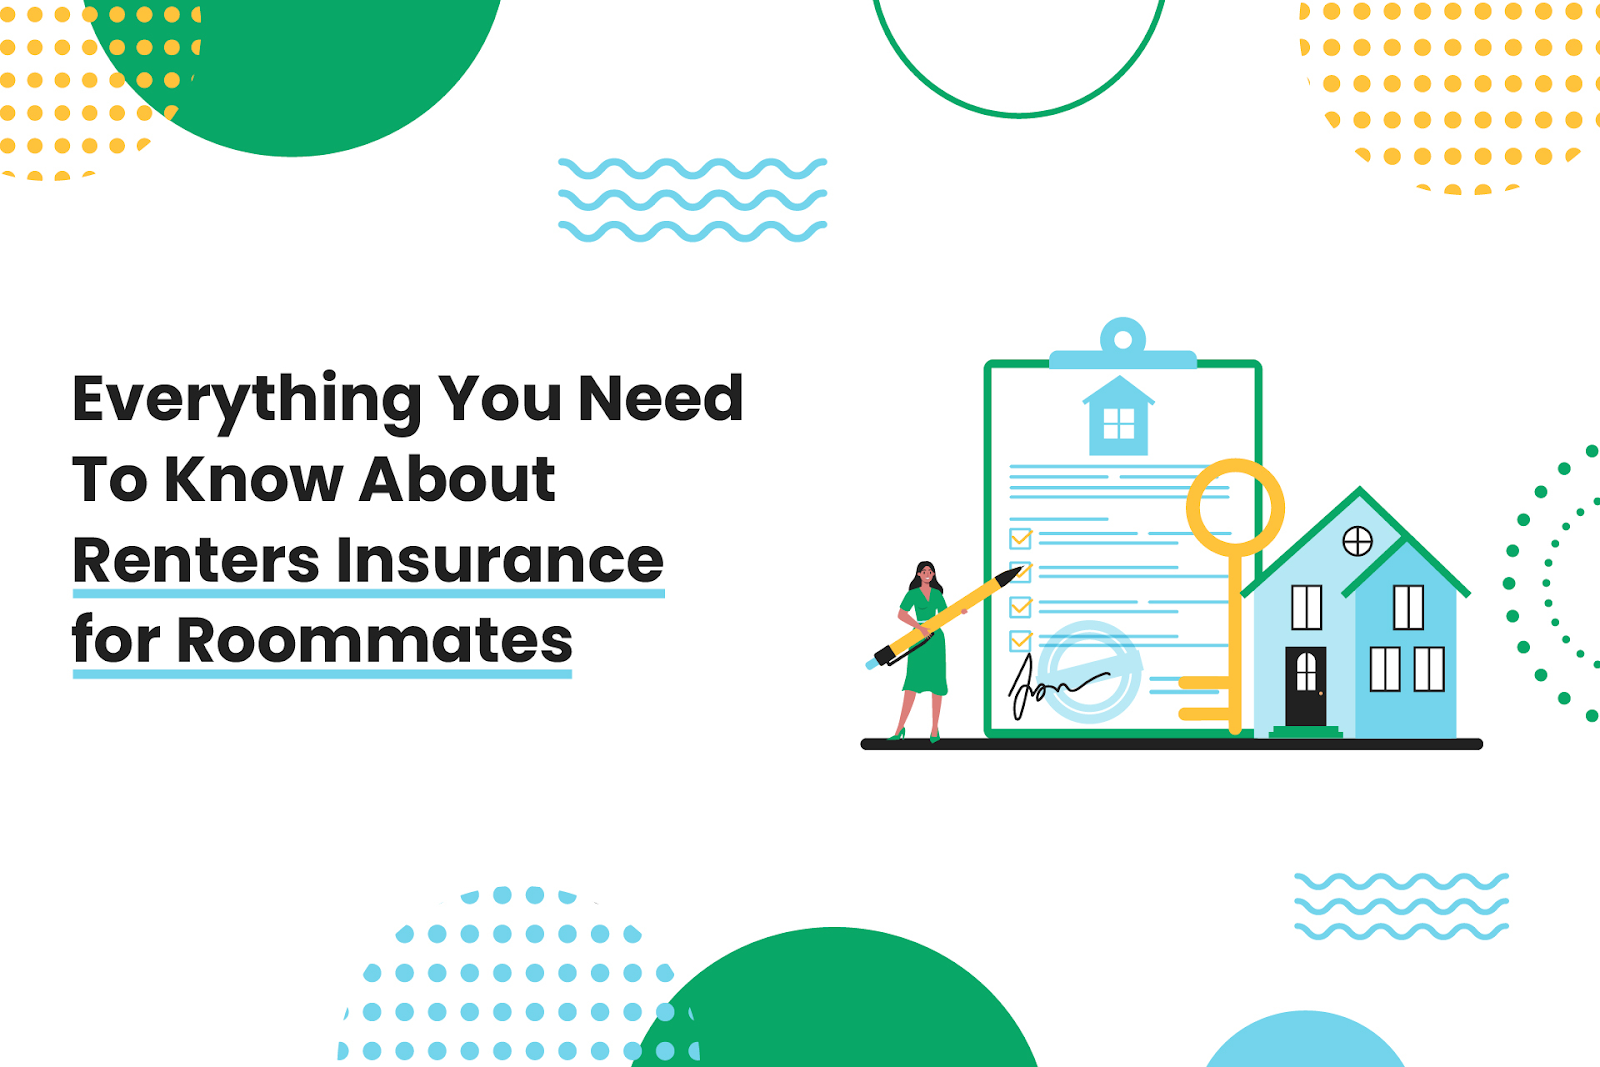 Everything You Need To Know About Renters Insurance for Roommates